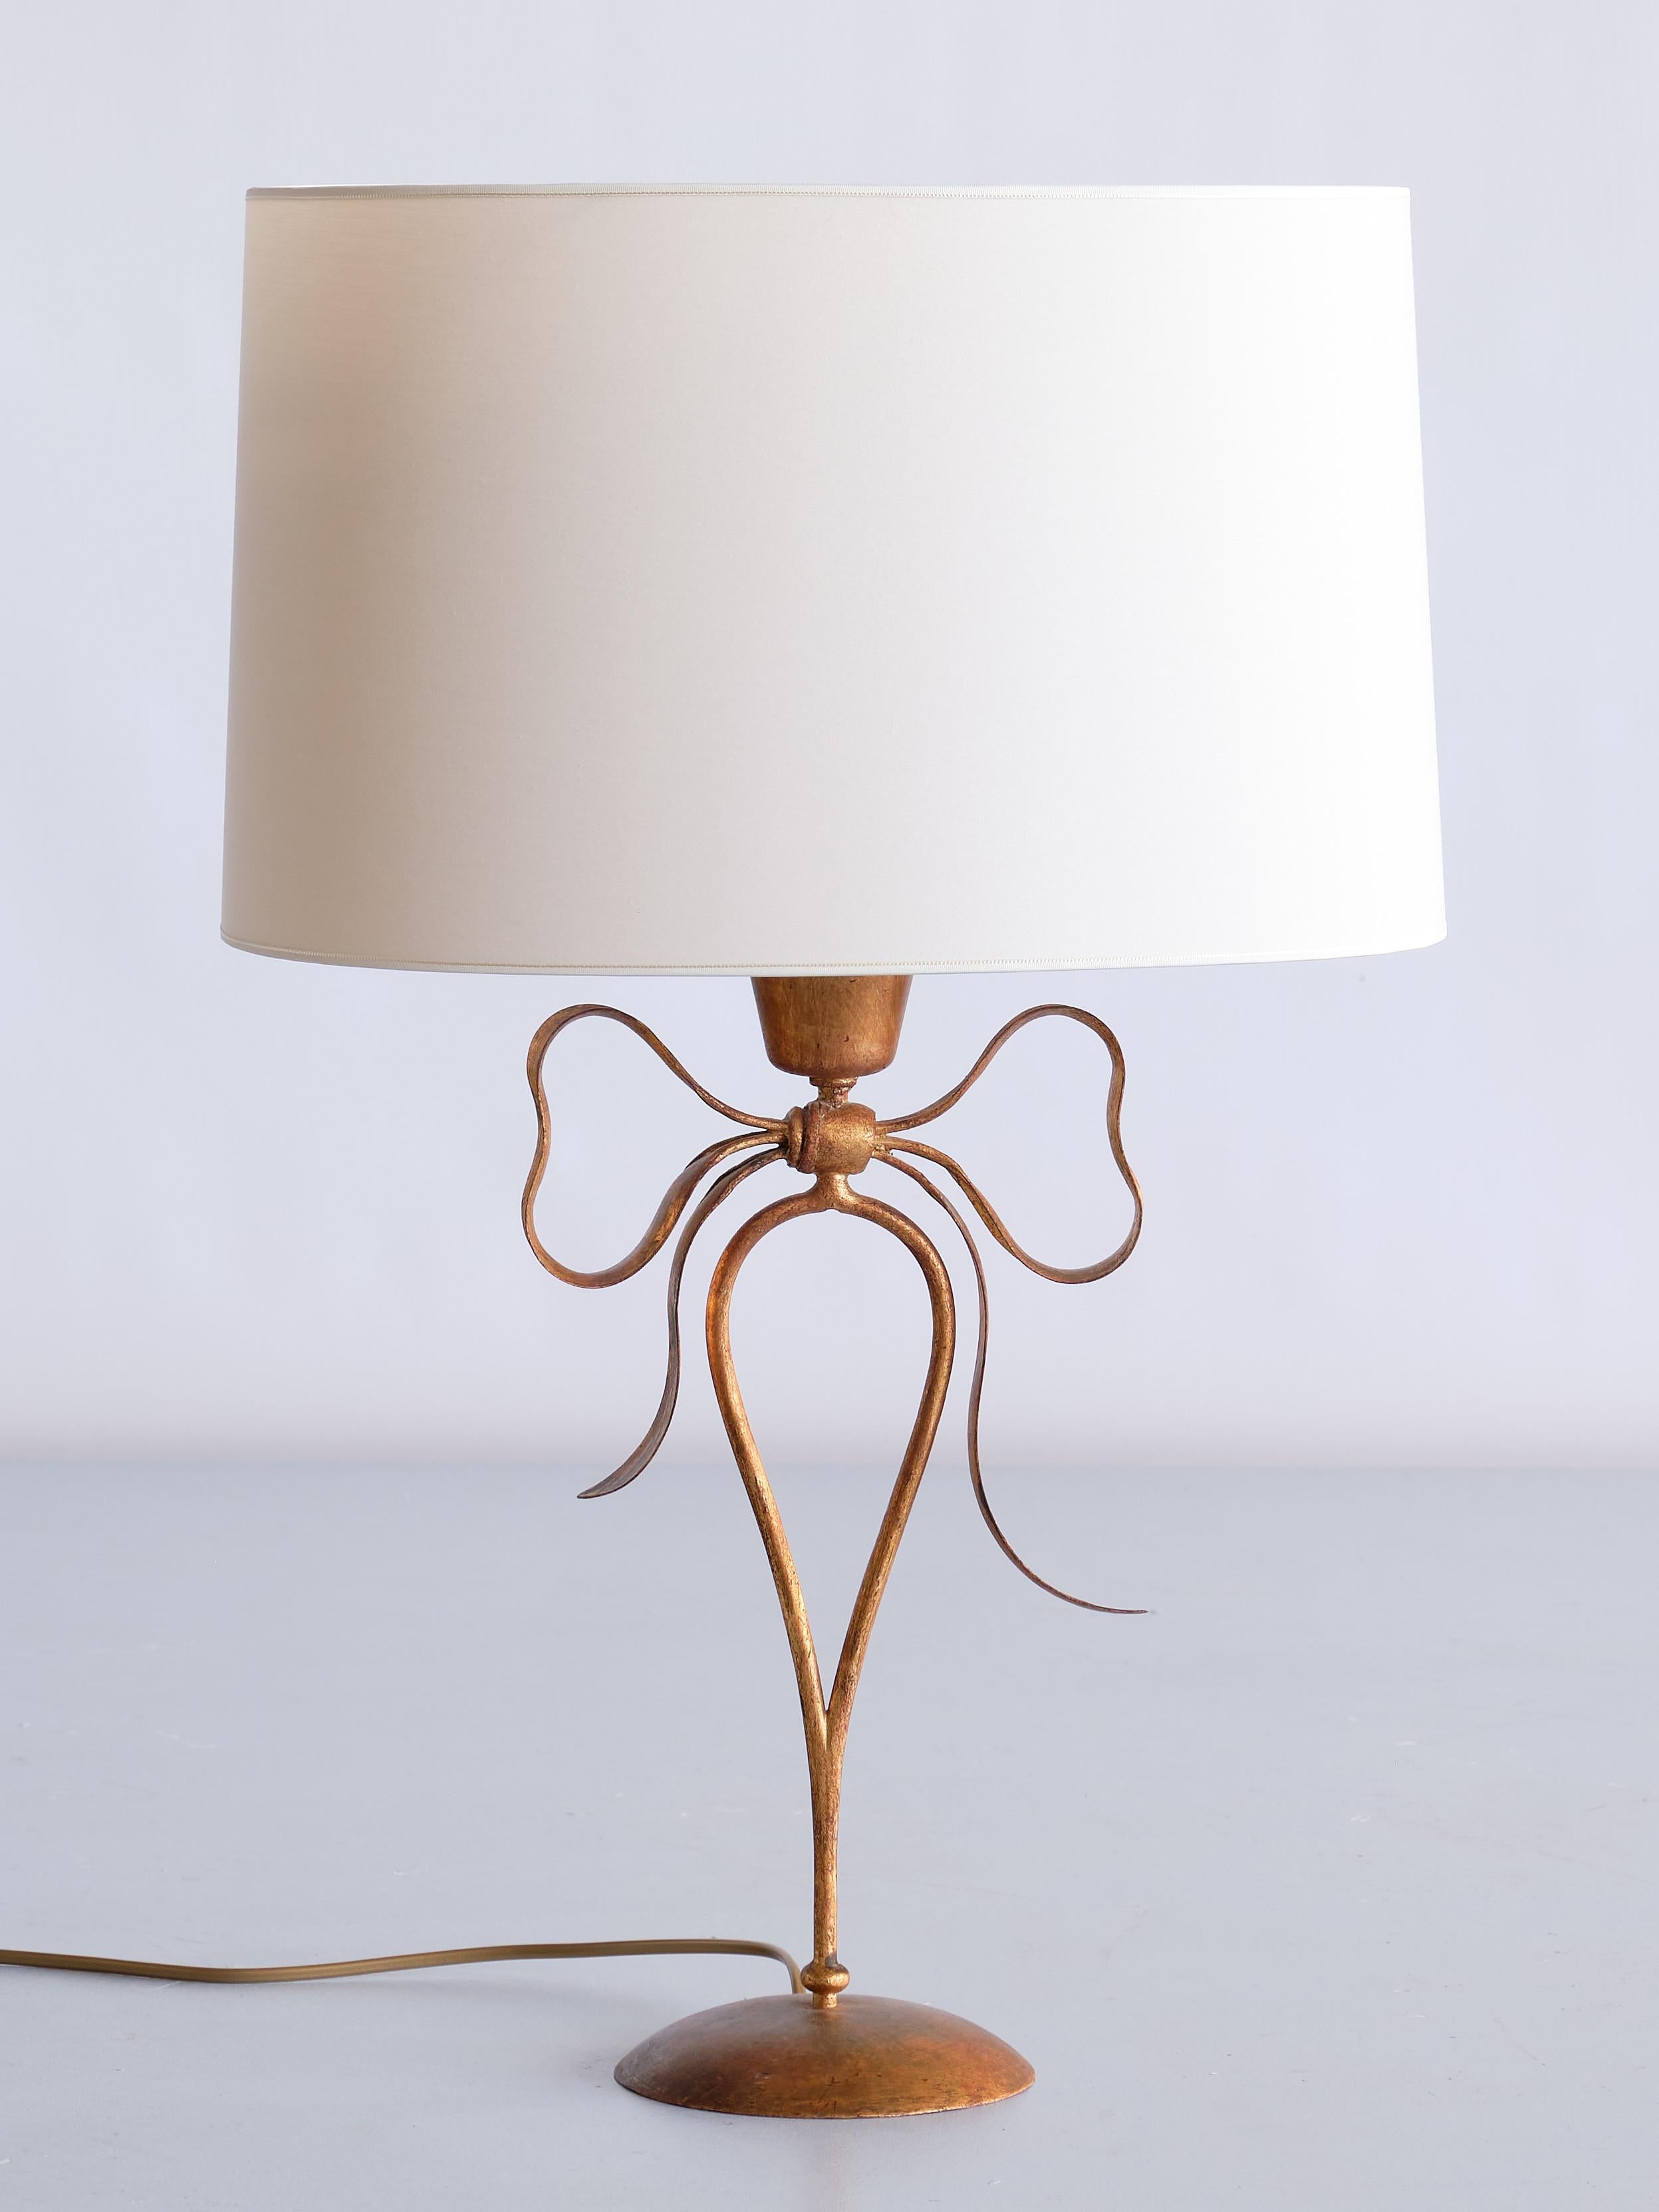 This elegant pair of gilded table lamps was produced by the noted Italian artisan ironwork firm Mingazzi of Bologna in the 1950s. The design is marked by the decorative bow shaped body ending in a circular base. The handcrafted lamps are made of